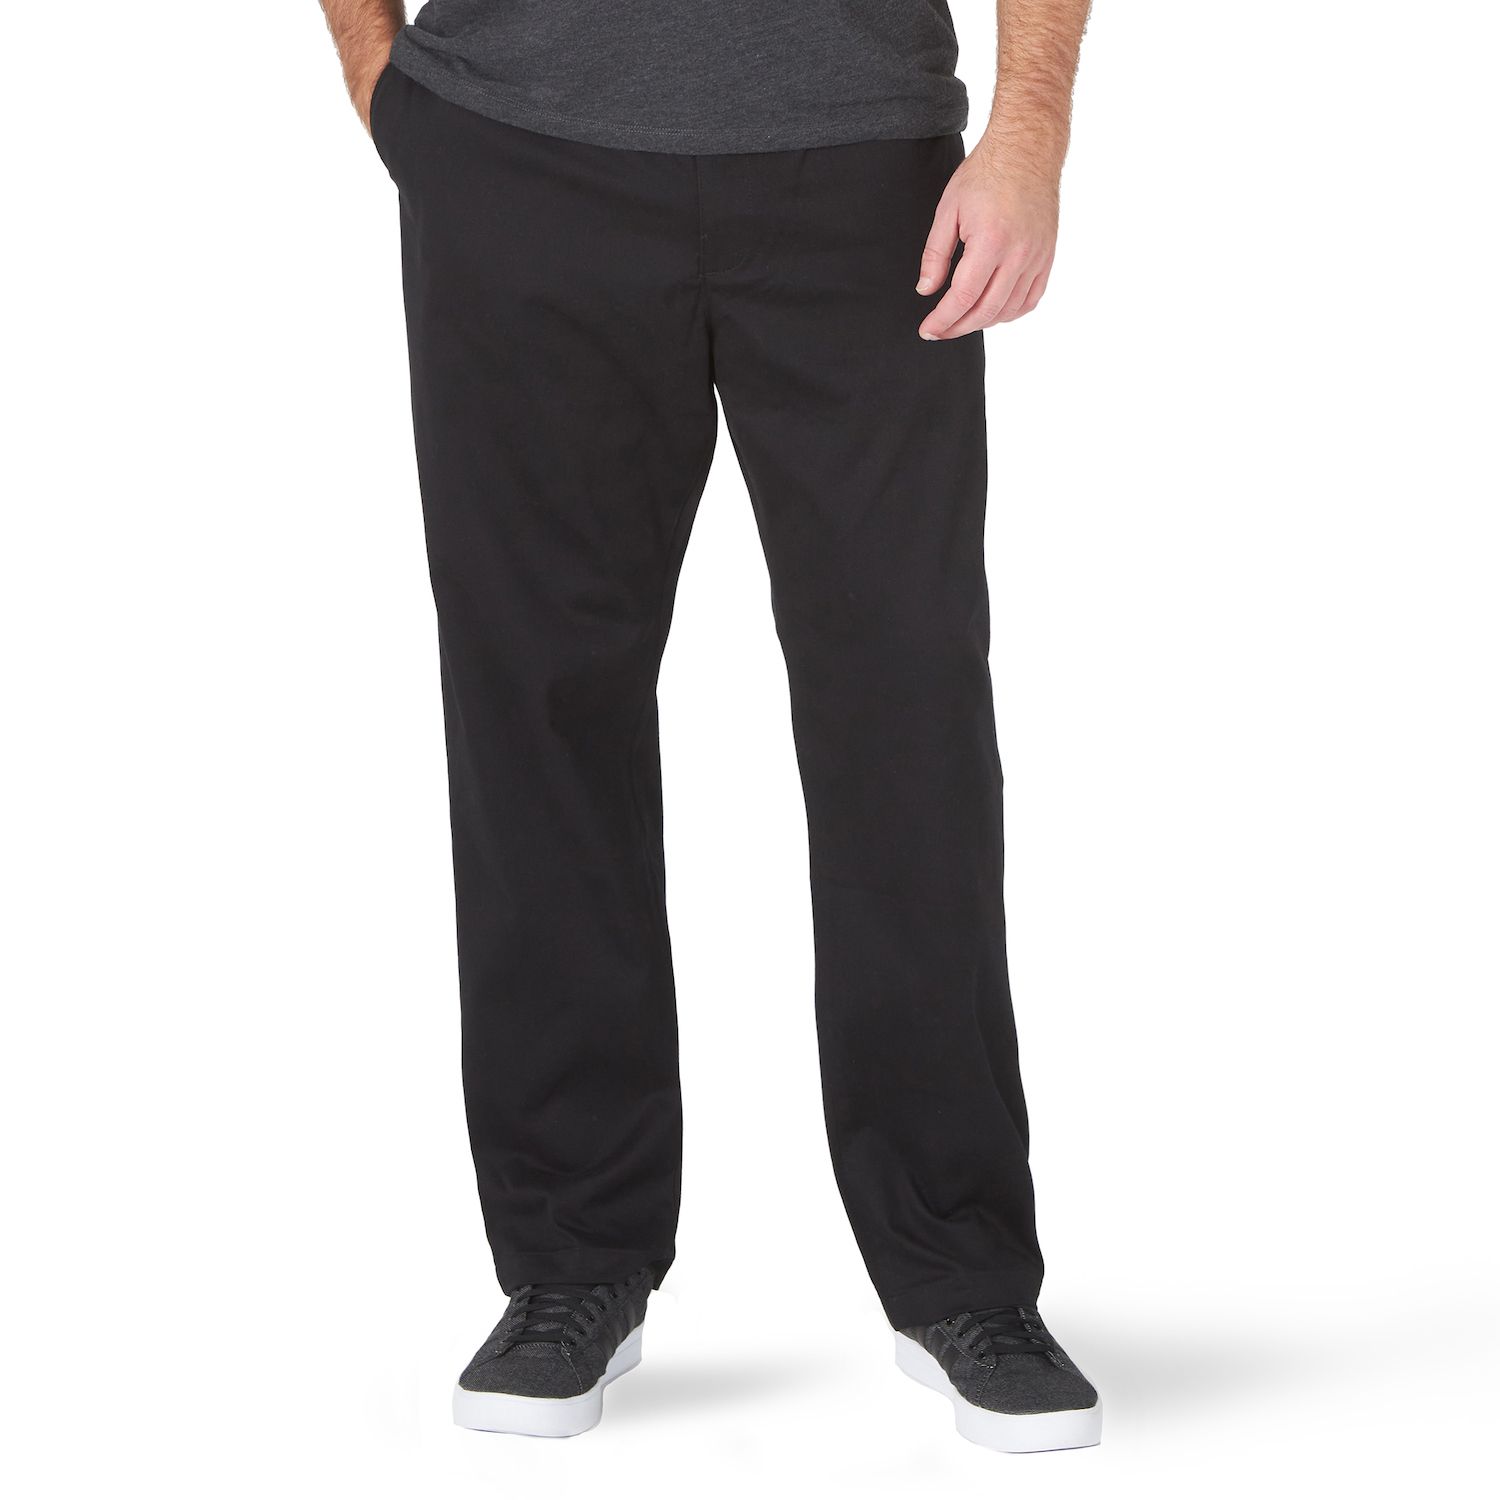 Image for Lee Men's Big and Tall Extreme Comfort MVP Pants at Kohl's.